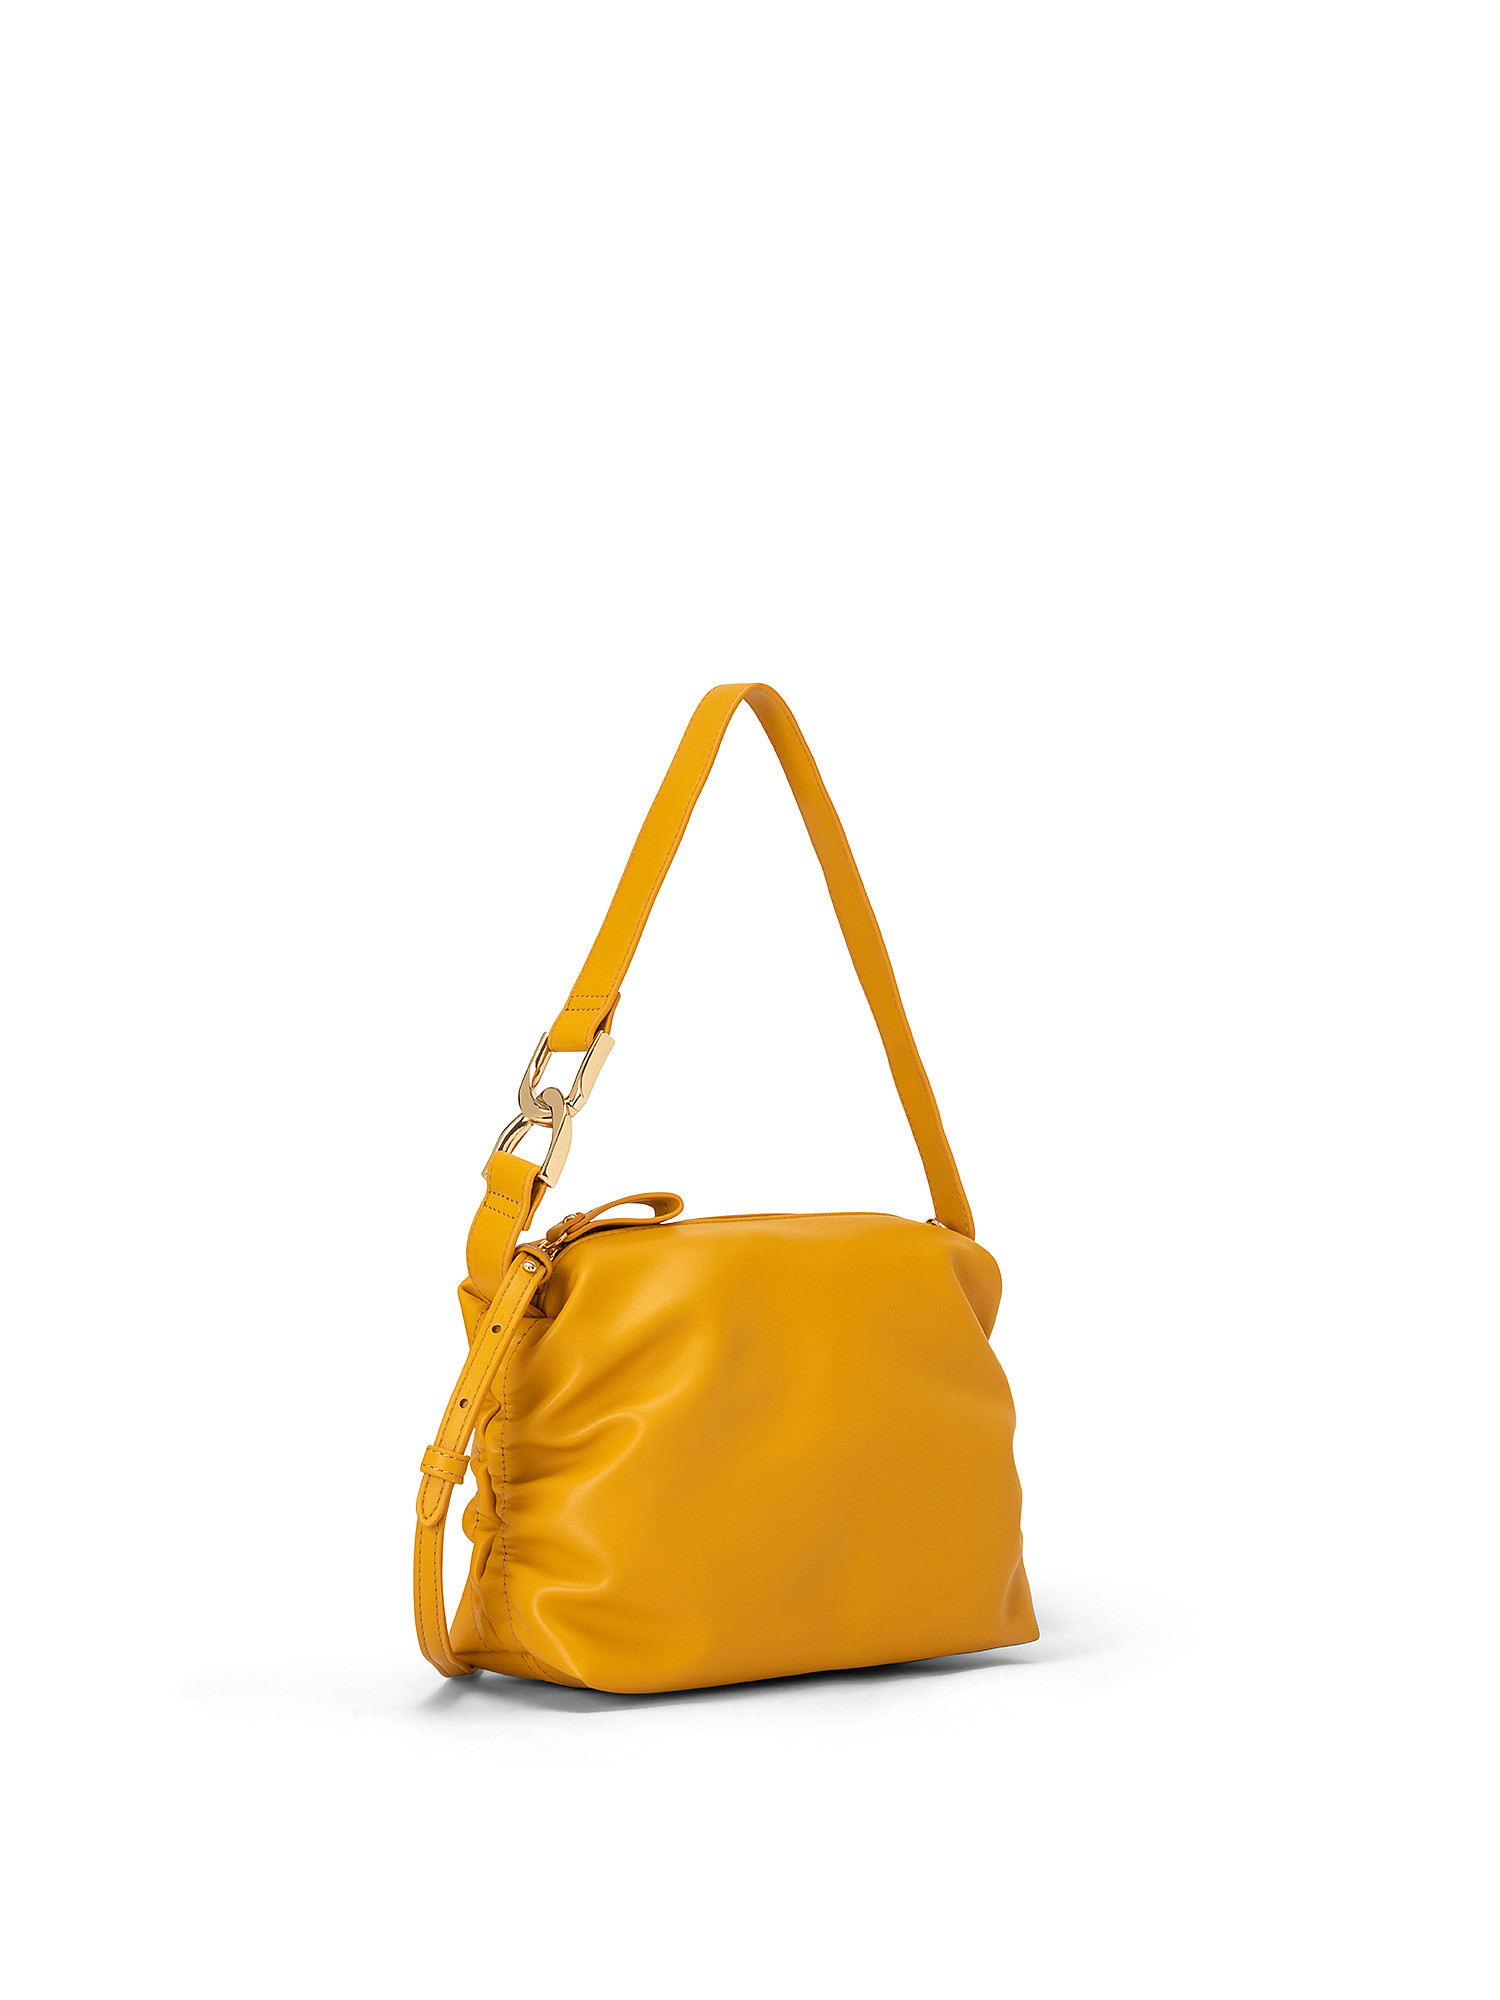 Shoulder bag with rings, Ocra Yellow, large image number 1